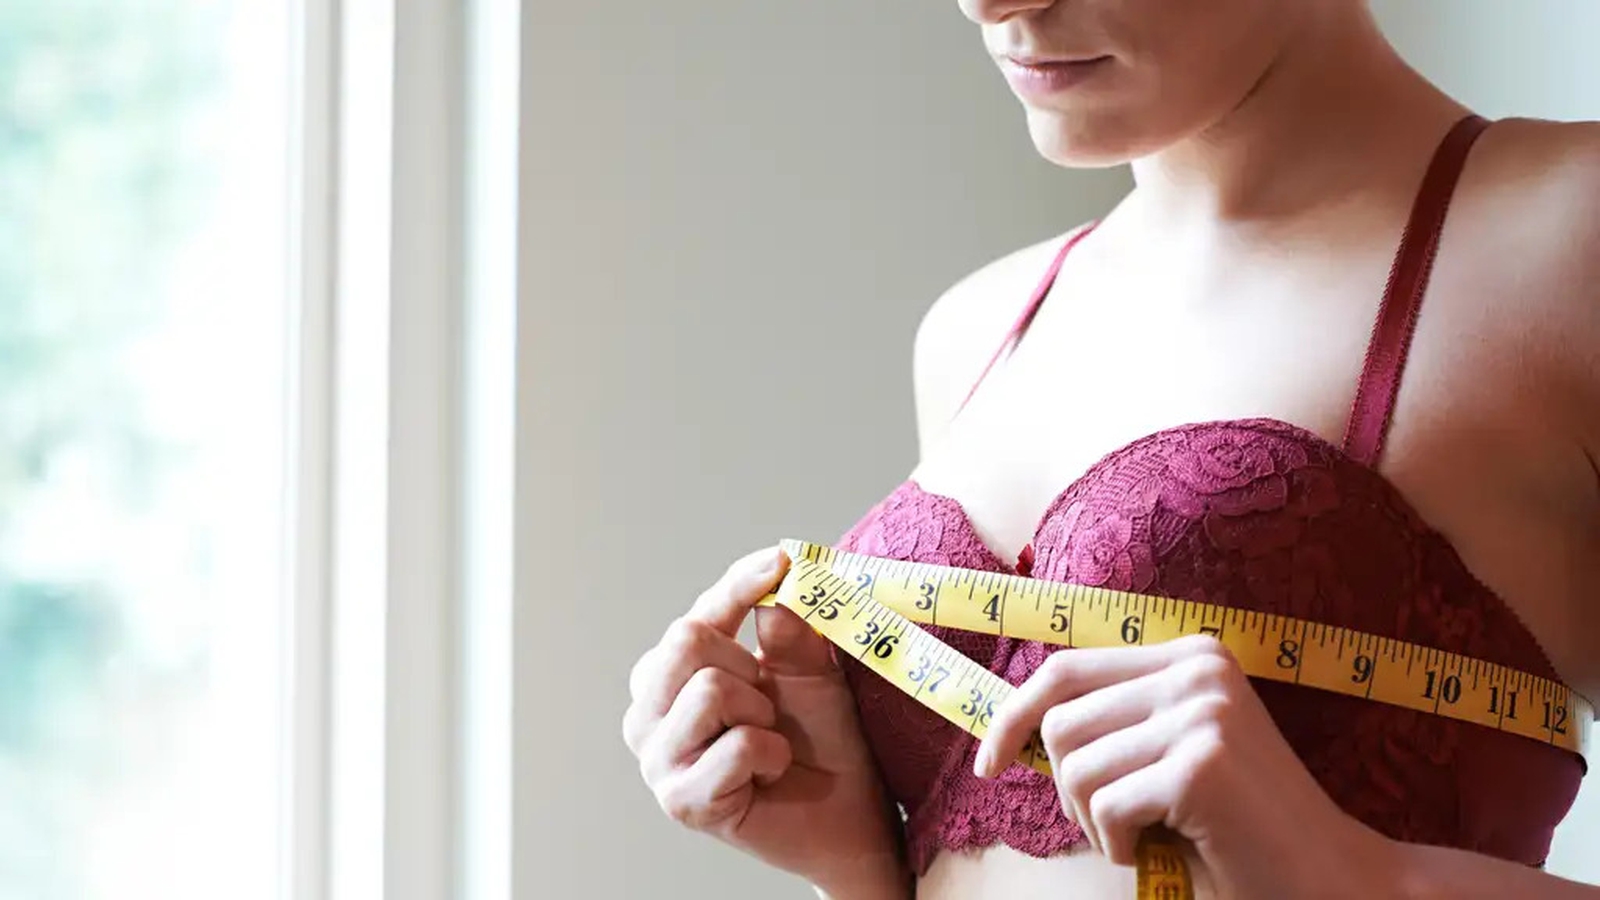 Wearing a bra is not necessary at all, says researcher - Times of